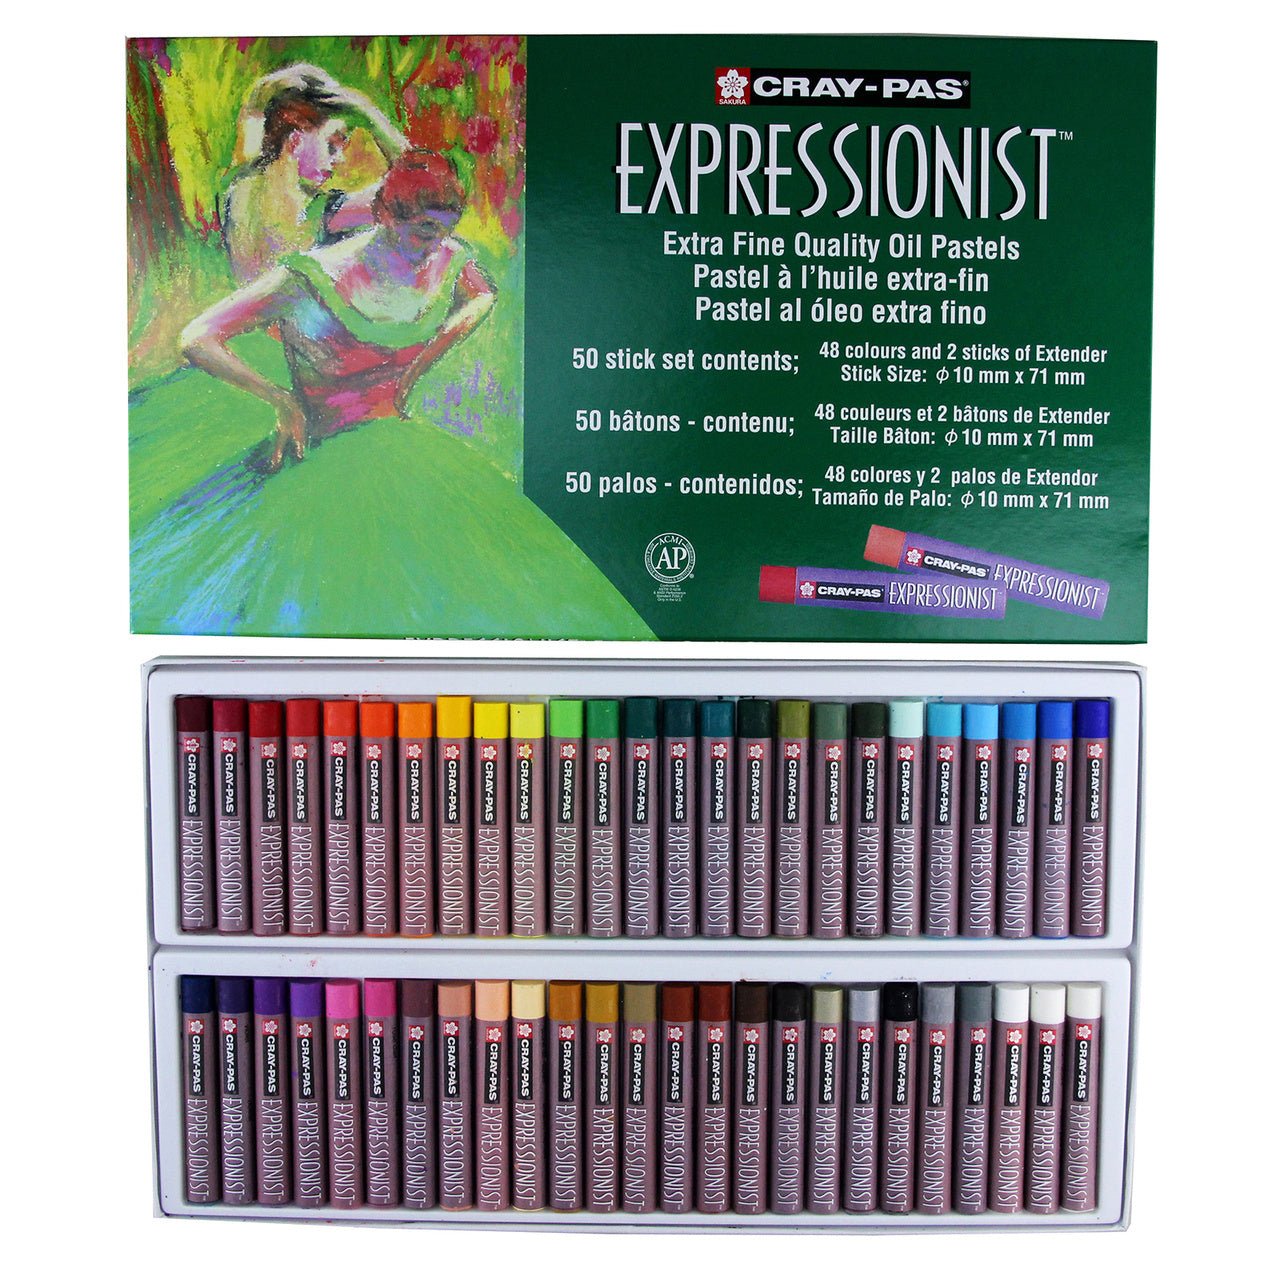 Cray-Pas Expressionist Oil Pastels set of 50 - merriartist.com